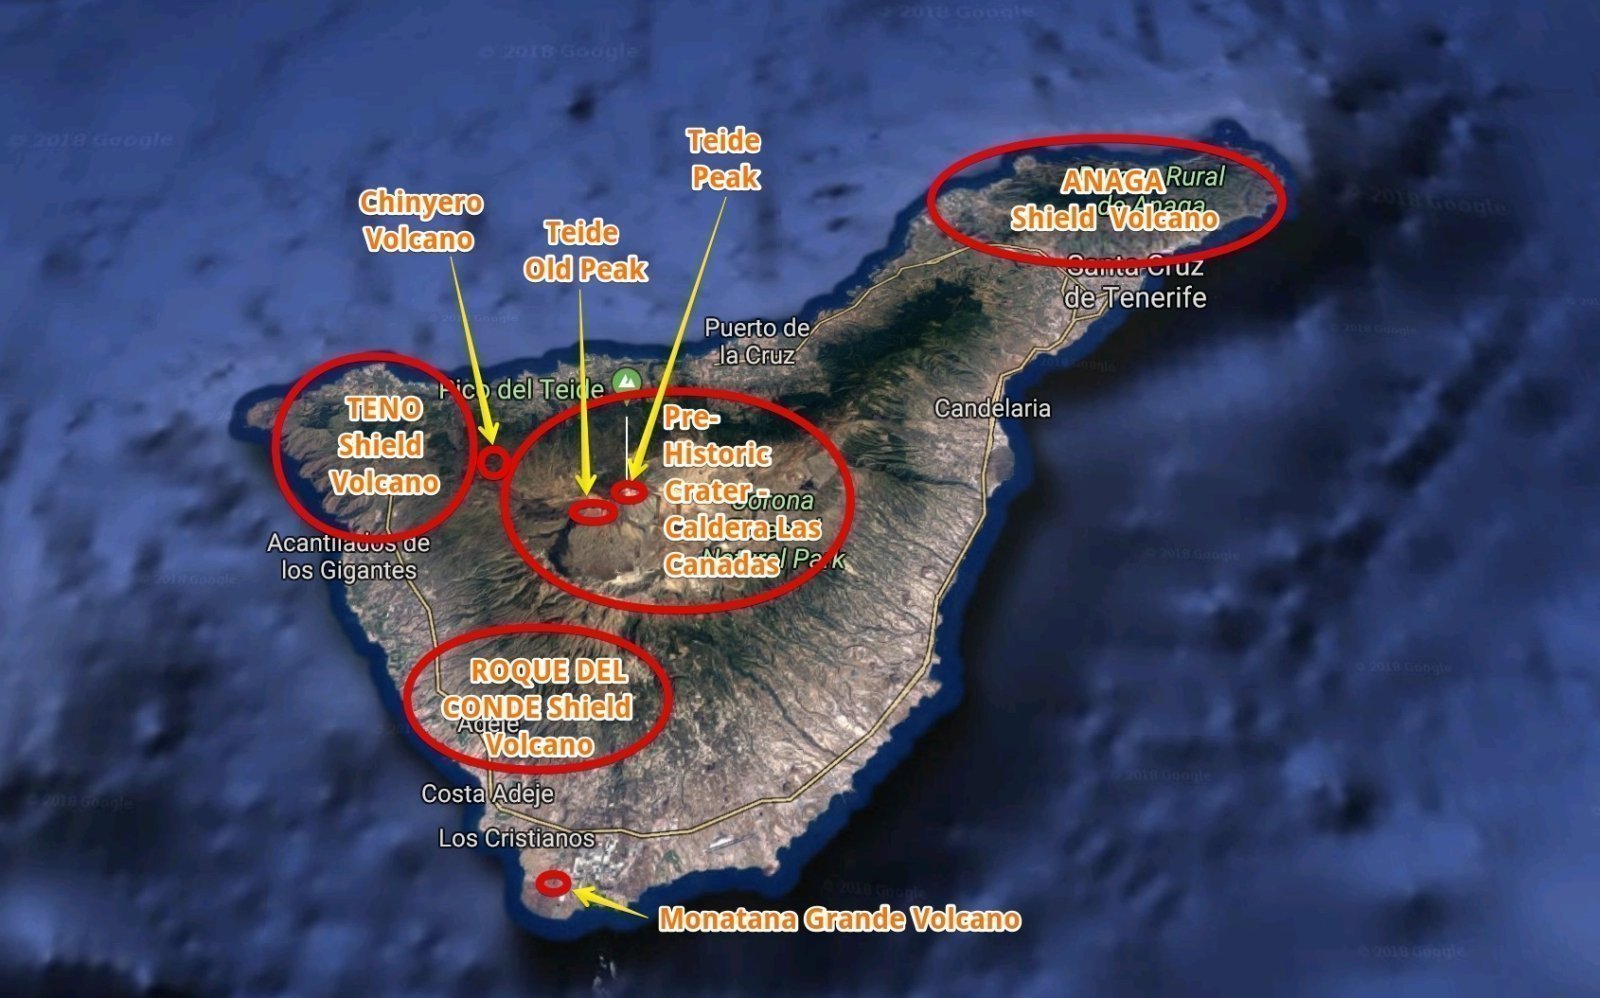 History of Tenerife formation by volcanoes